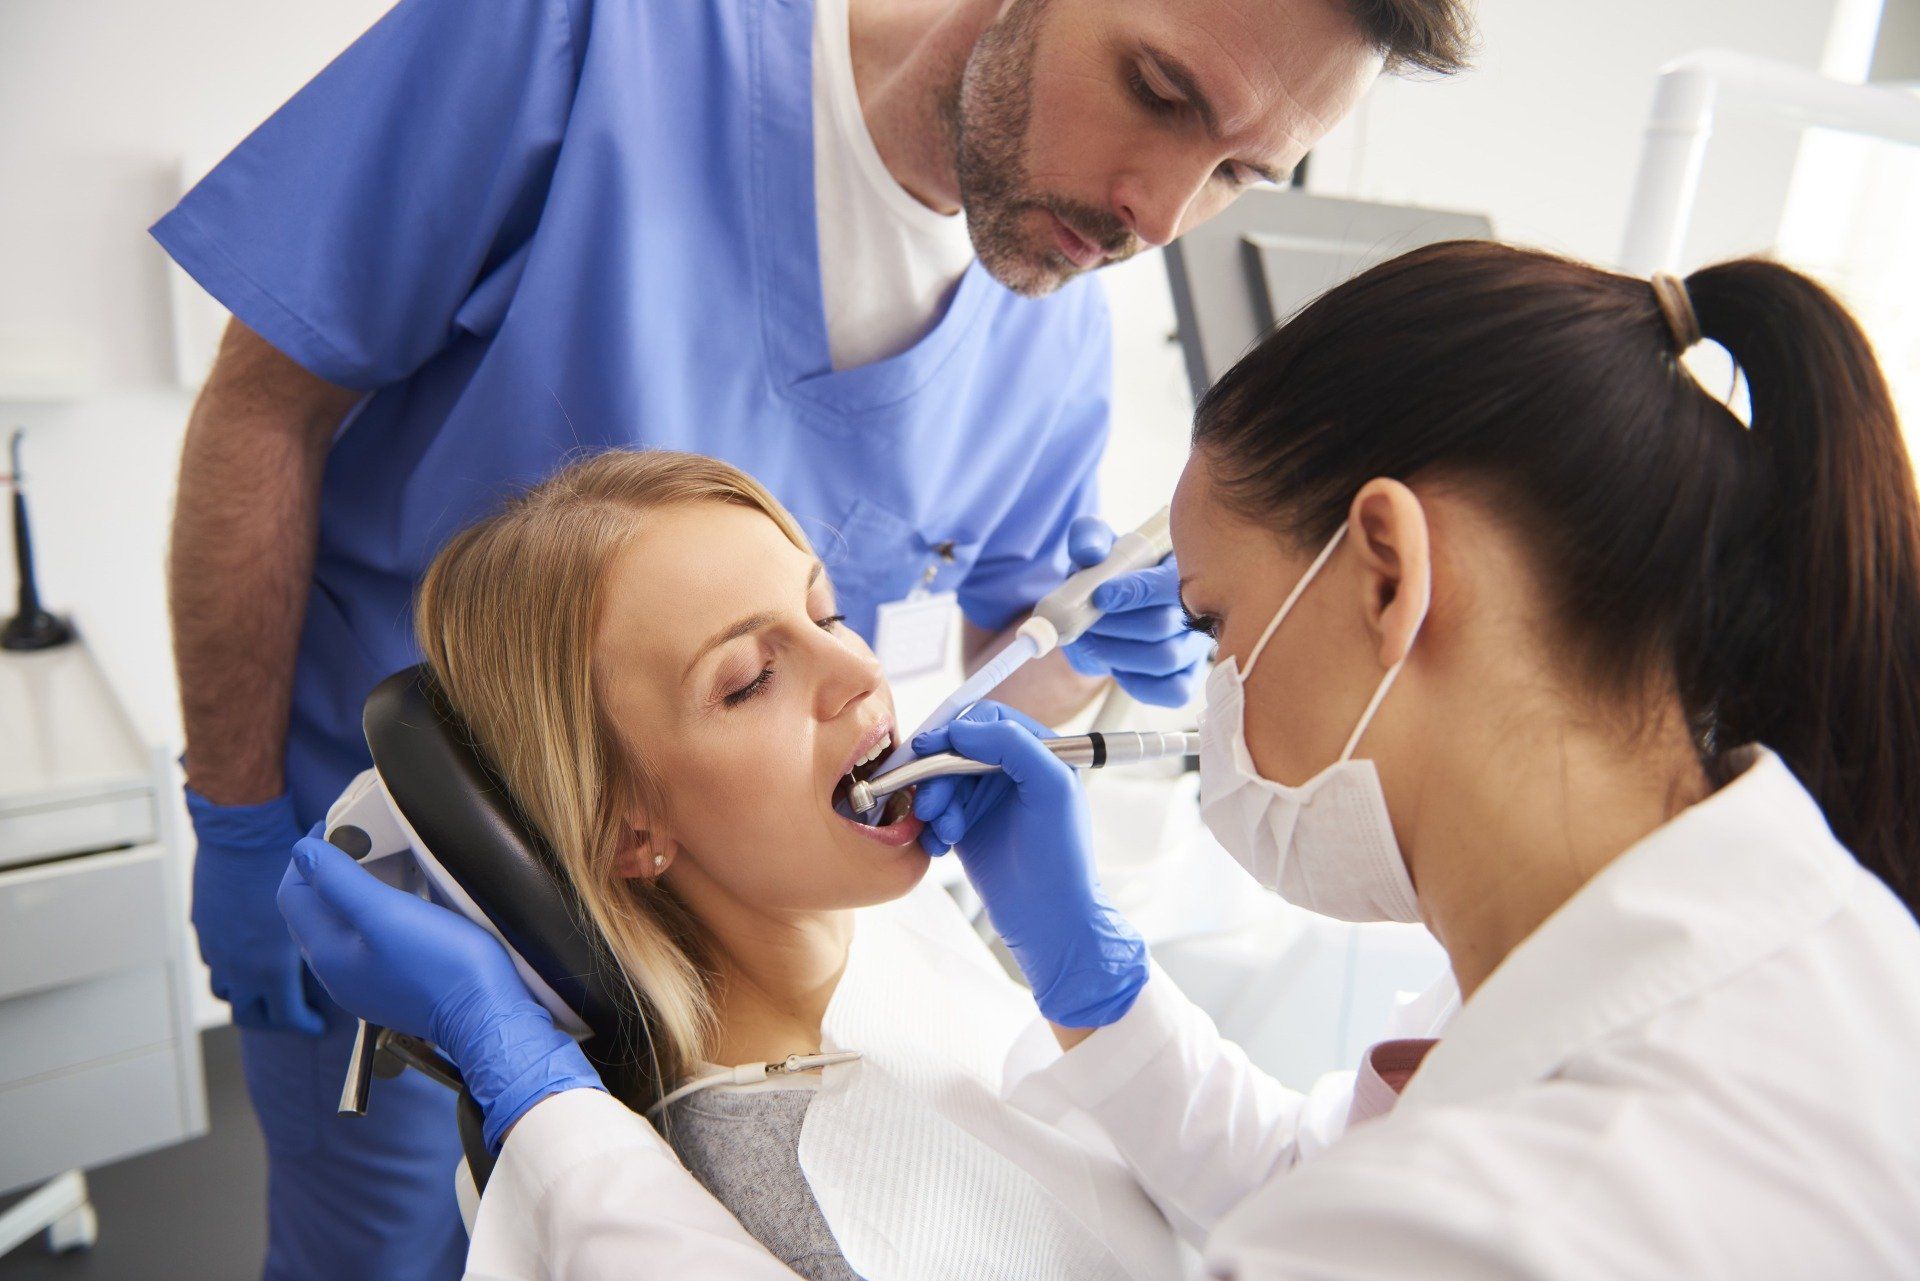 Cost root canal treatment in bermuda